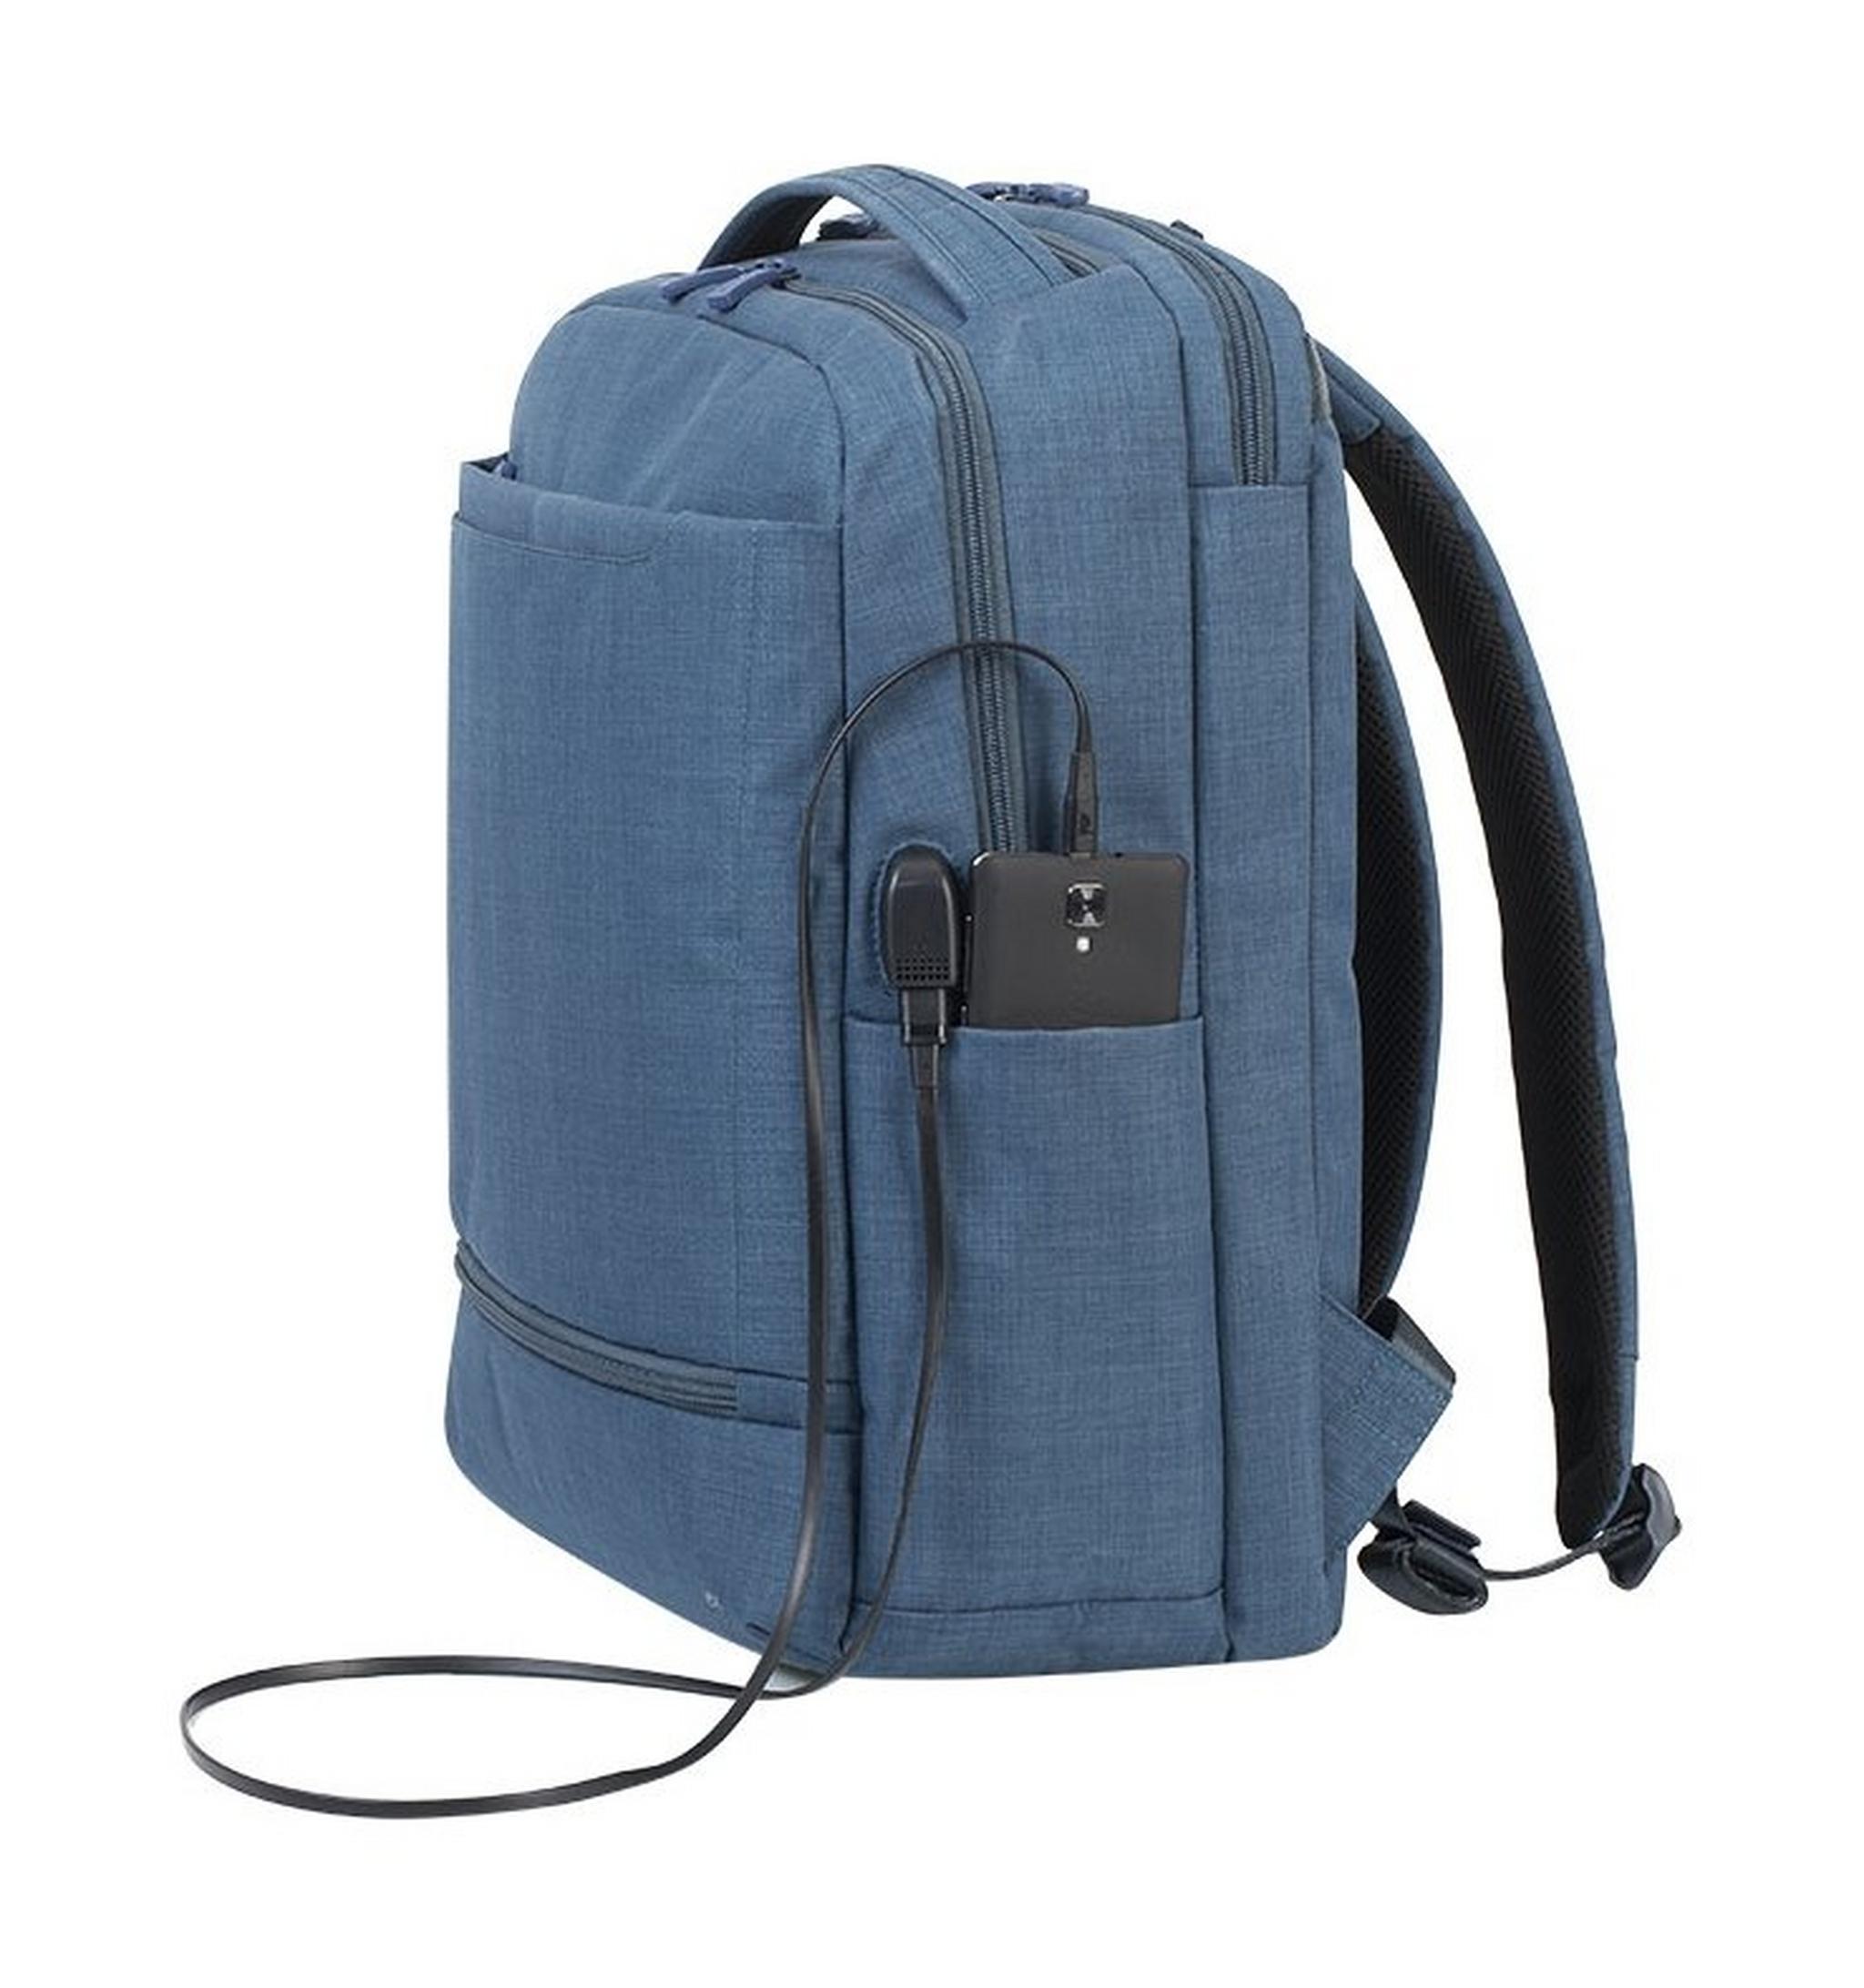 RivaCase 17.3 Inch Carry-On Laptop Backpack (8365) - Blue